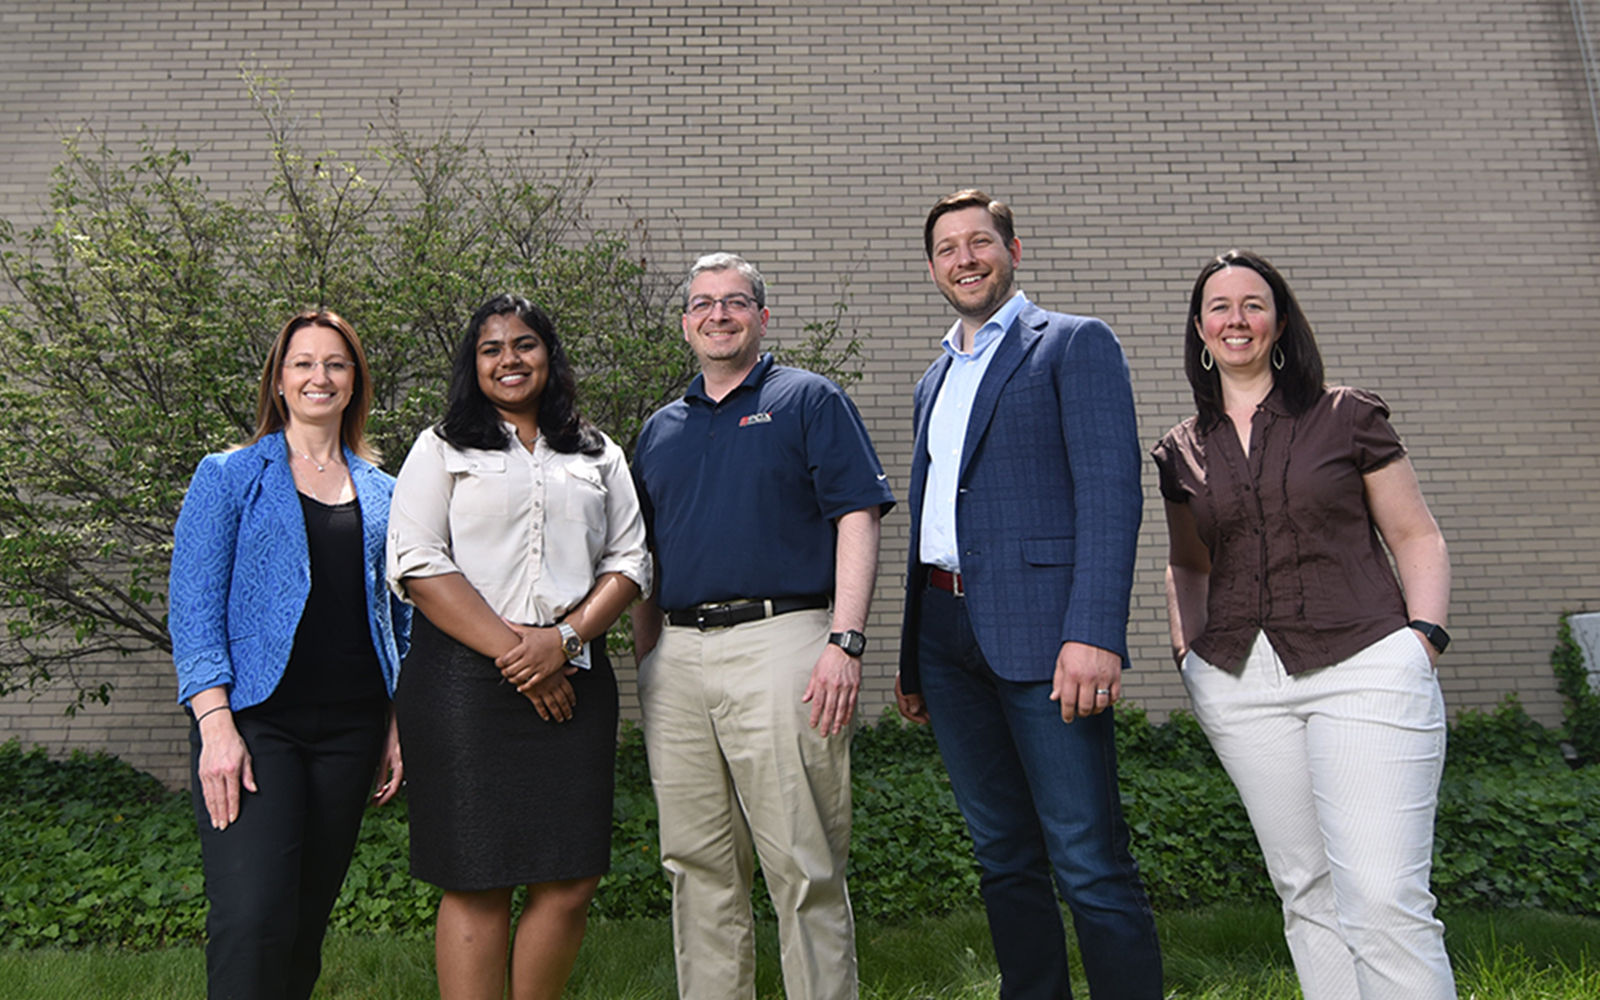 Left to right, professor Anna Radziwillowicz, MSBAPM student Chitra Reddy, PCX general manager and COO Aris Fotos, MBA Student Don Pendagast, and professor Jennifer Eigos